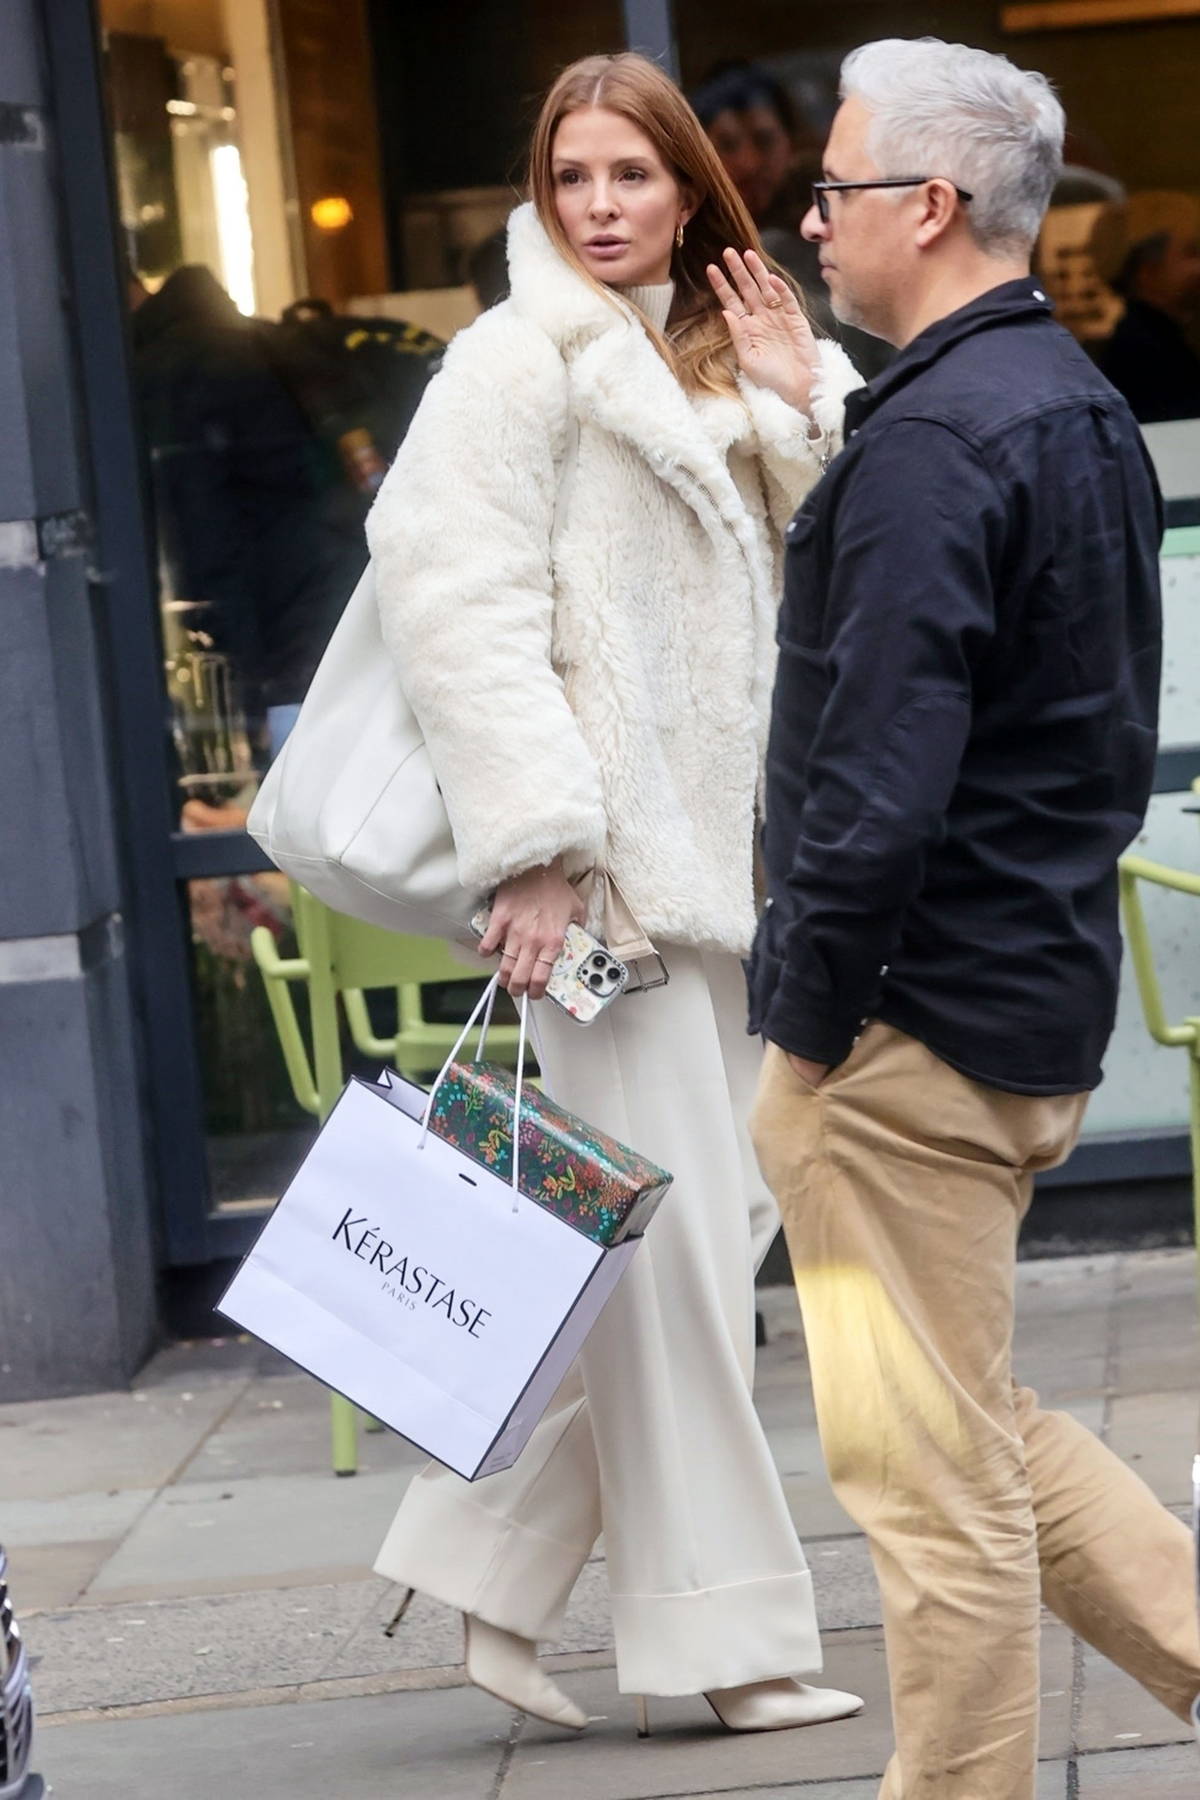 Make-up free Millie Mackintosh is city chic as she does last minute  shopping ahead of Made In Chelsea wrap party